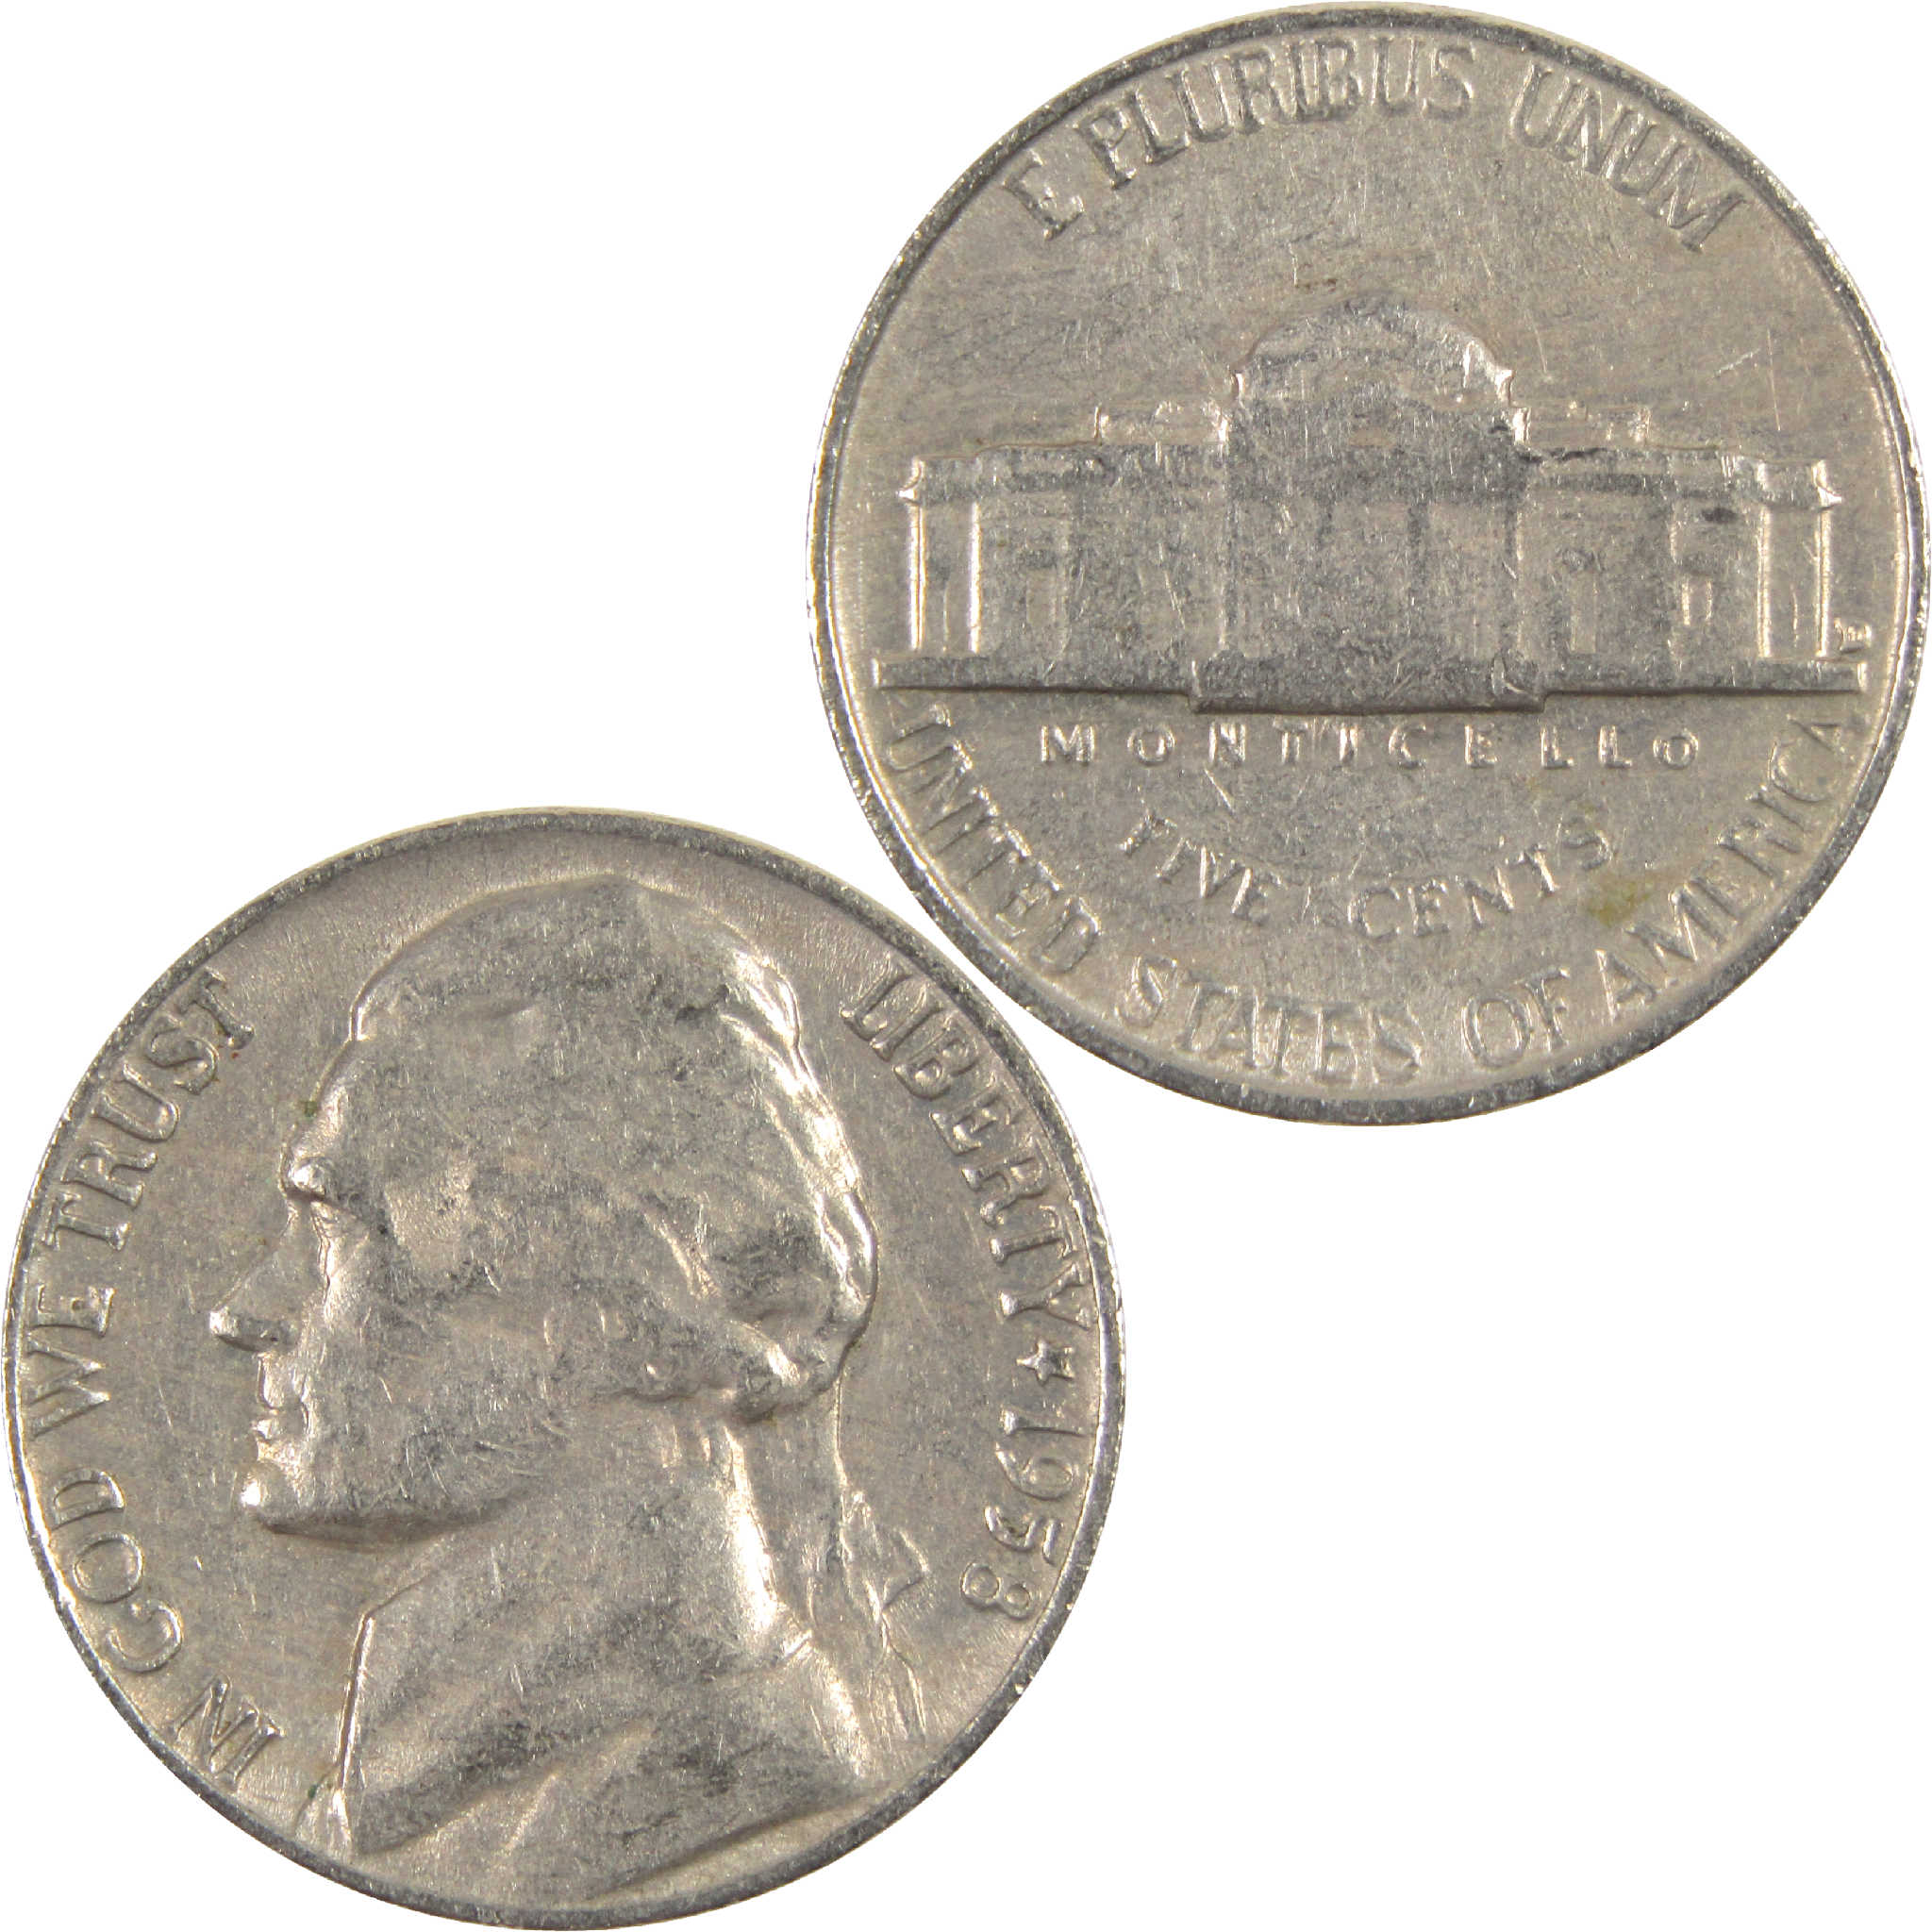 1958 D Jefferson Nickel AG About Good 5c Coin